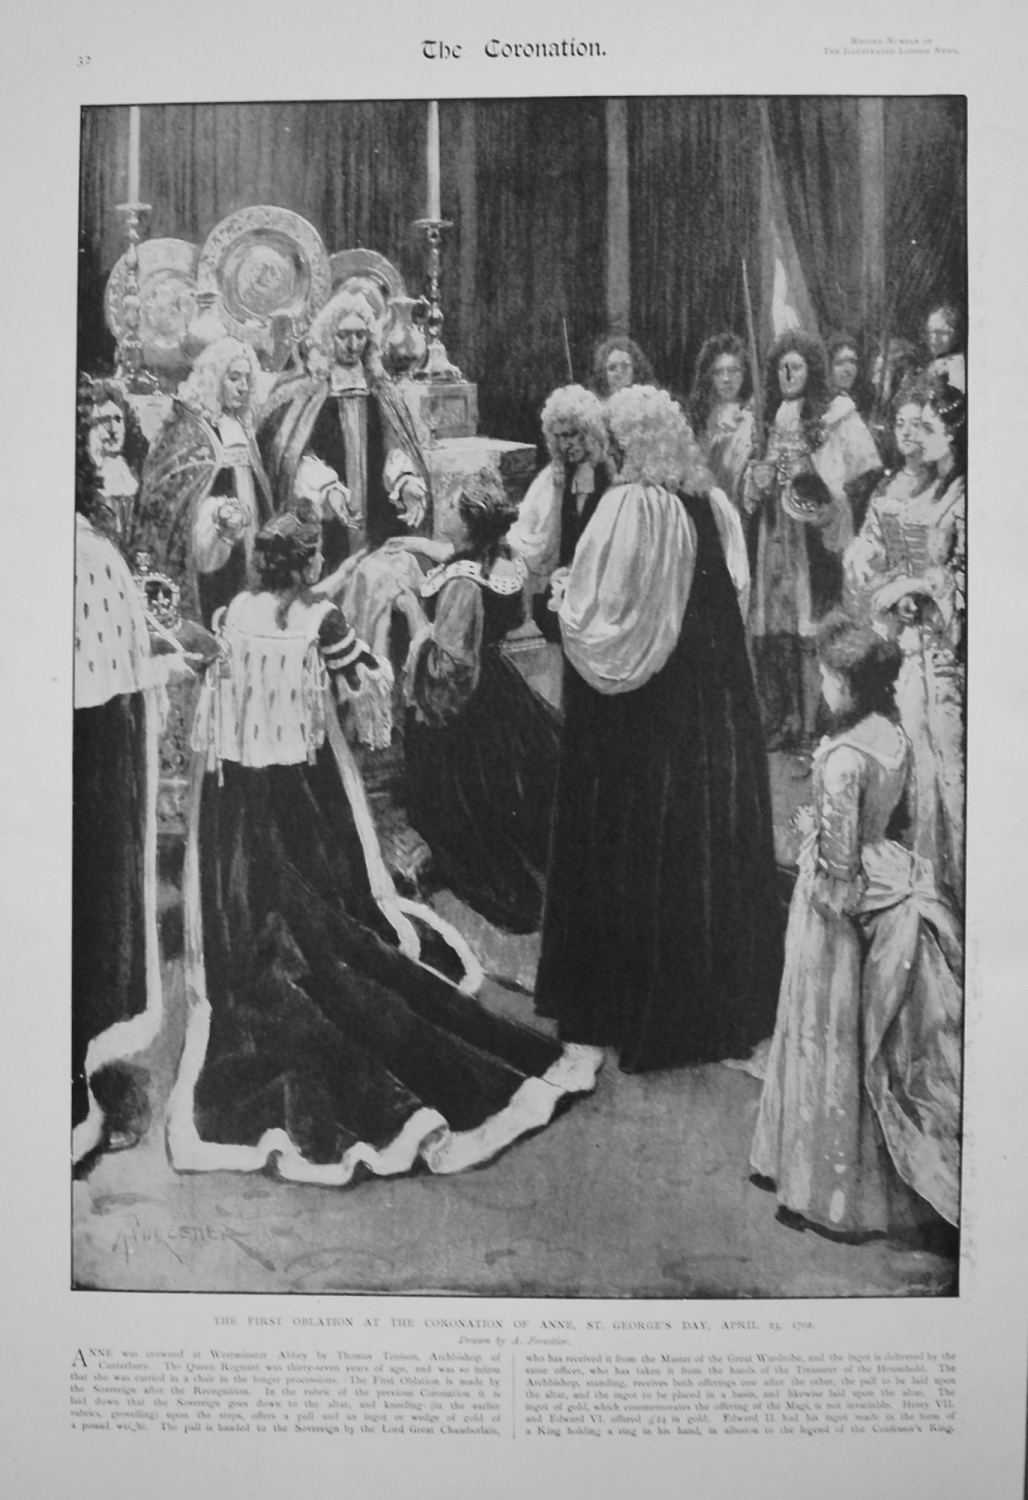 The First Oblation at the Coronation of Anne, St. George's Day, April 23rd,